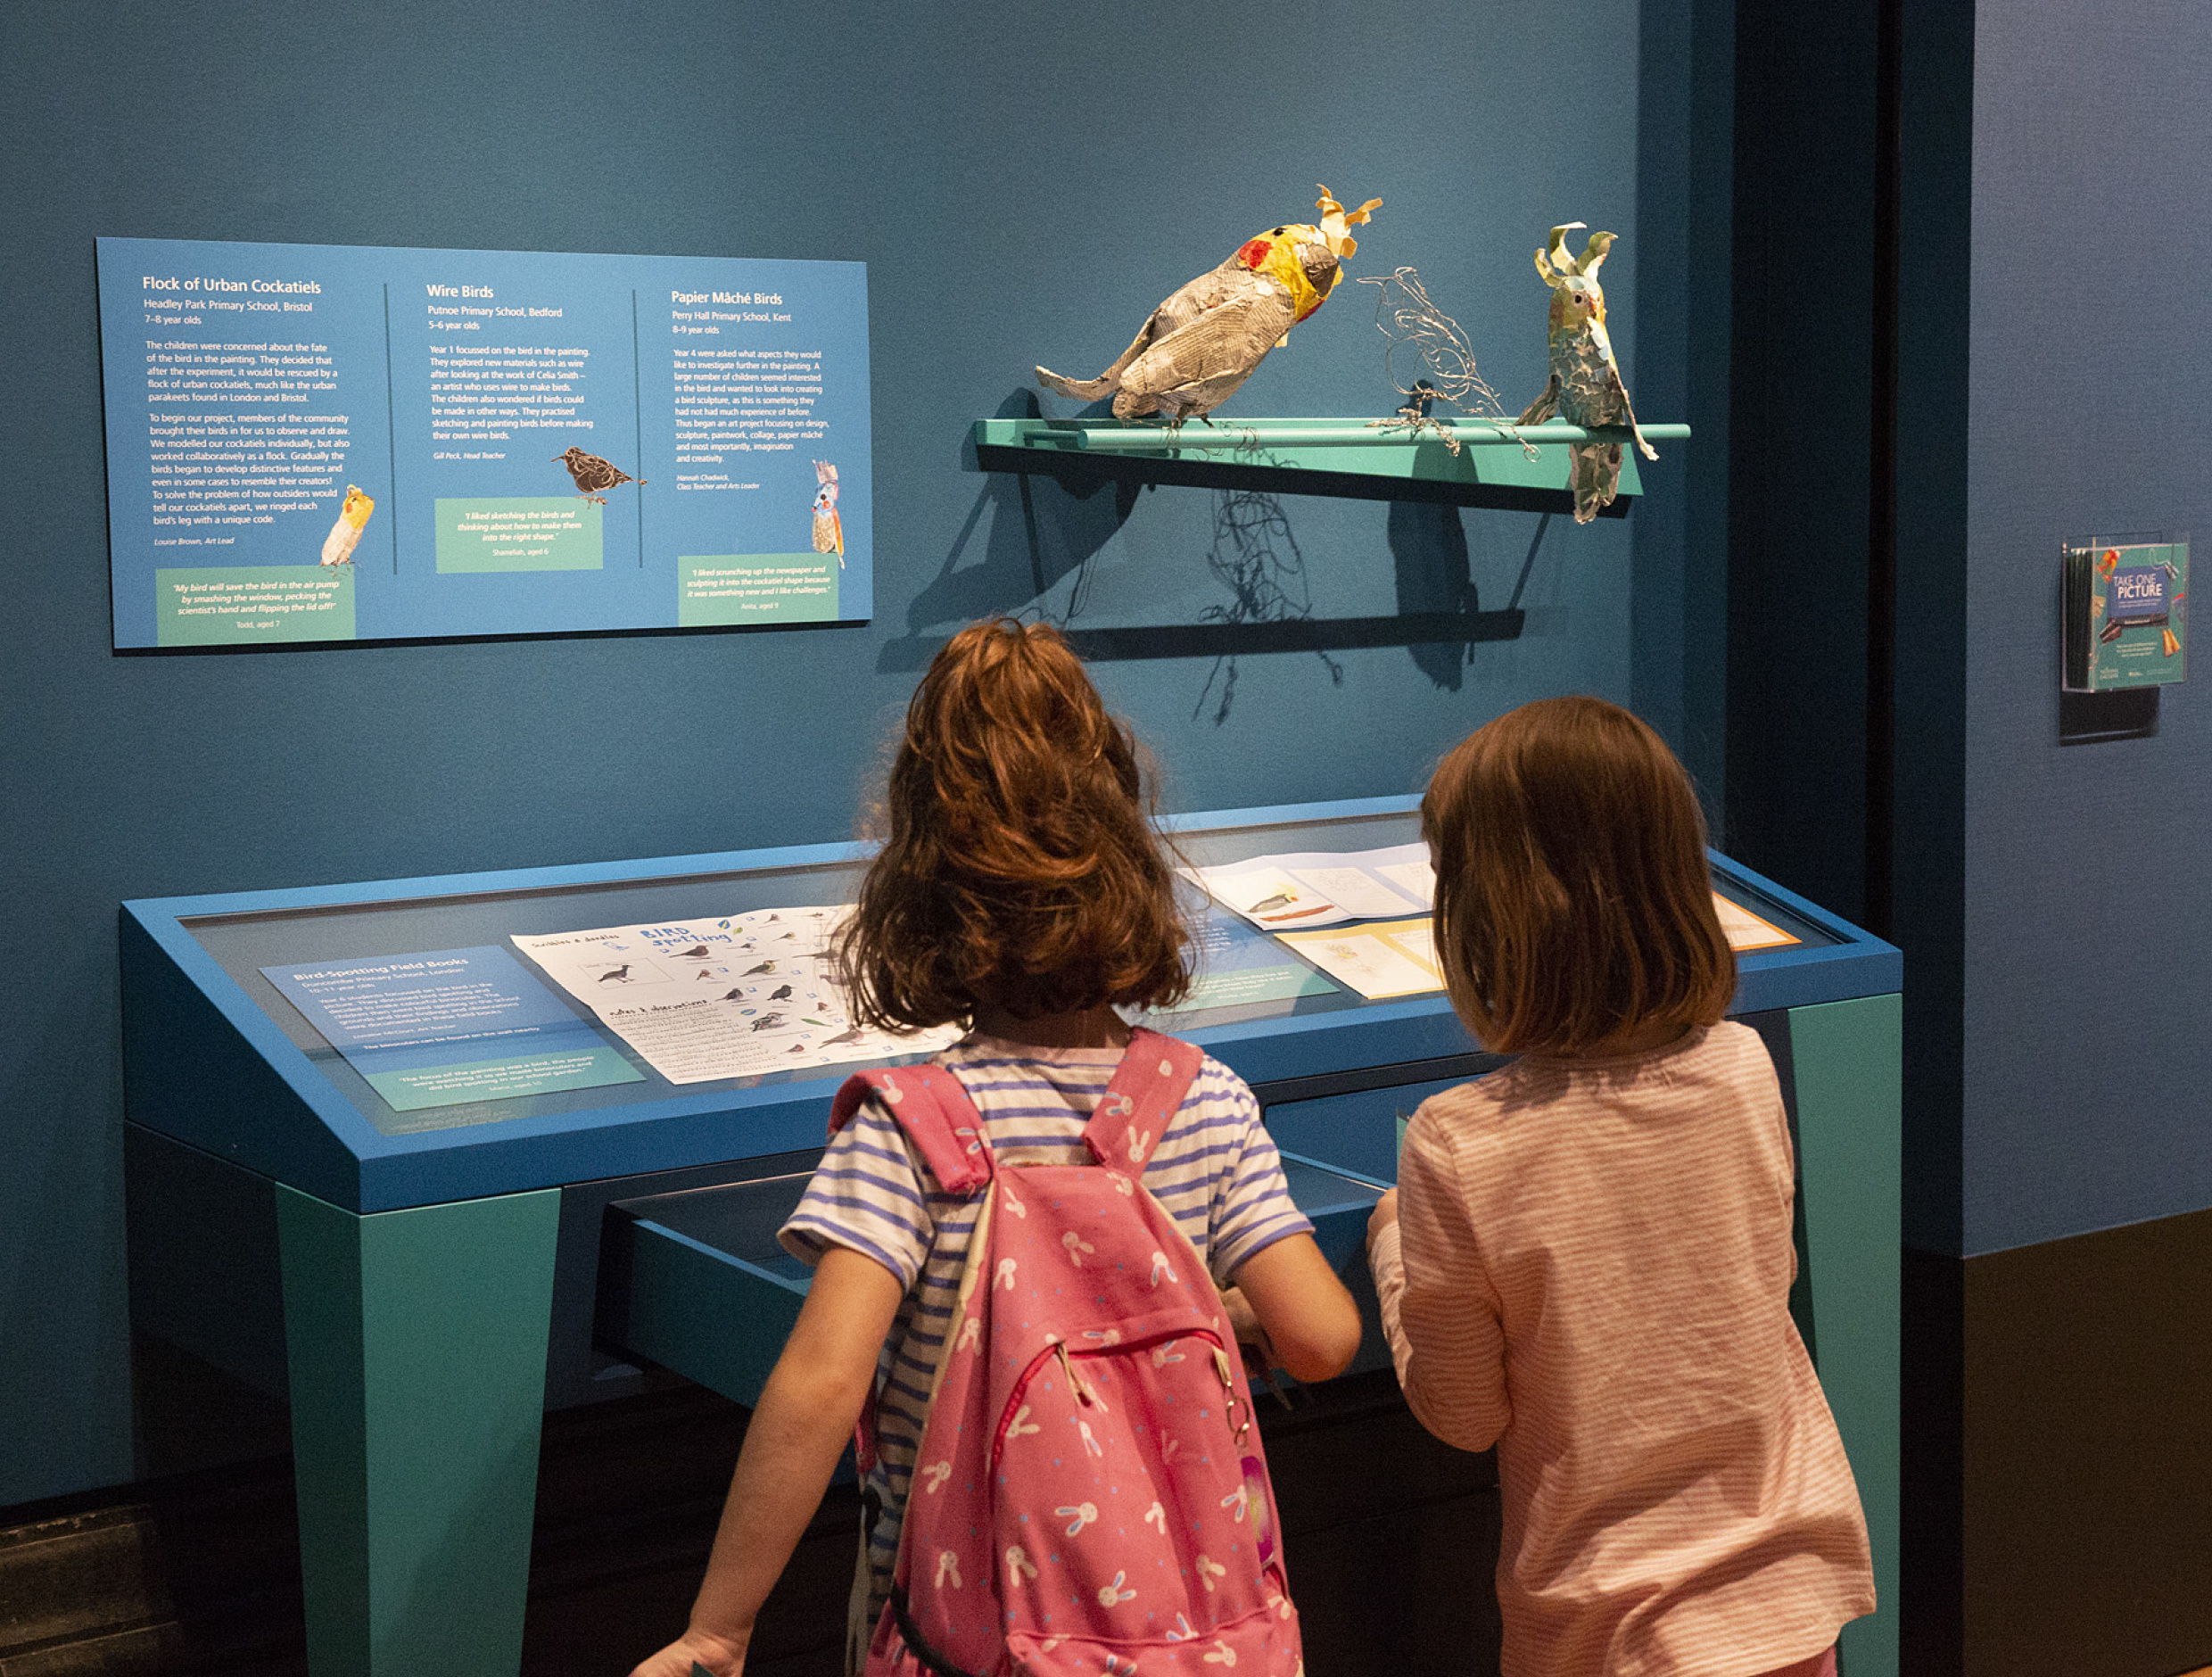 Two small children interacting with exhibition display on birds